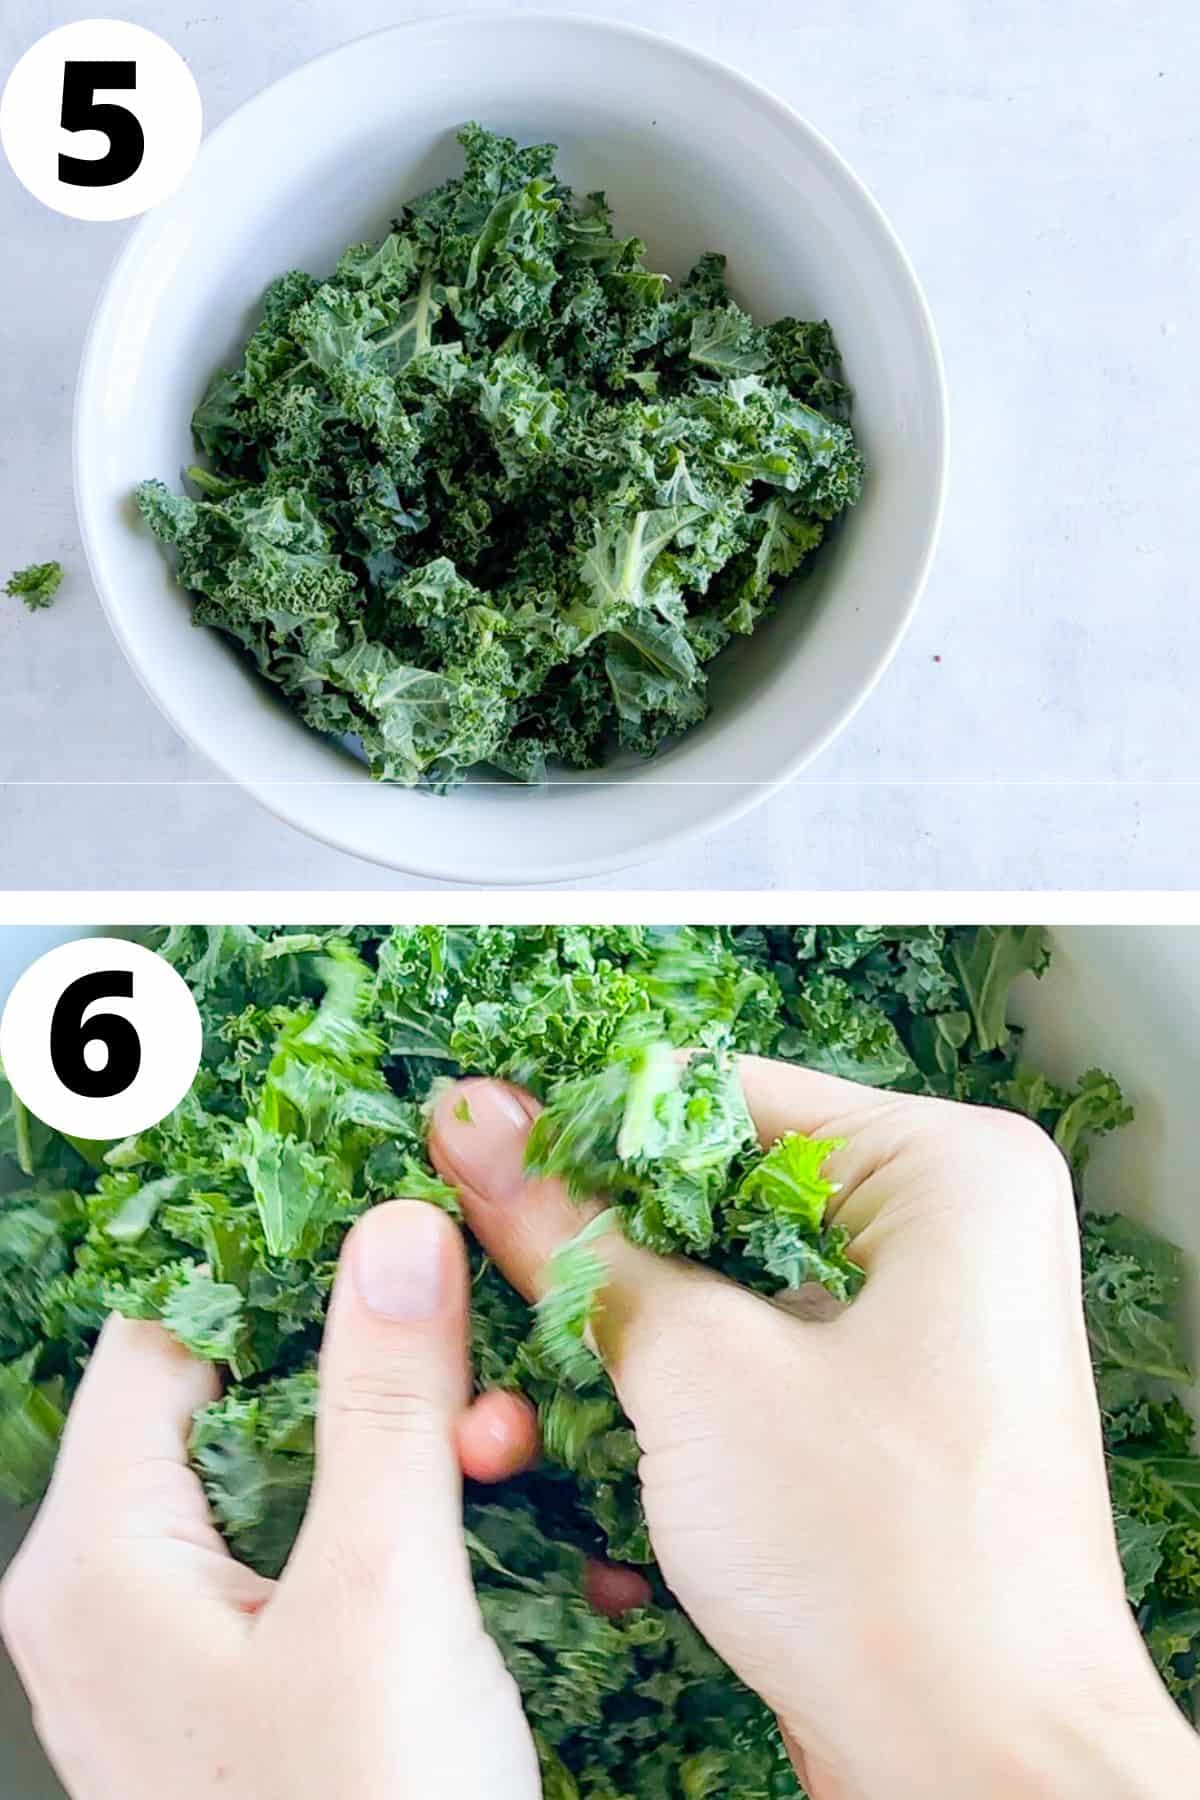 two images showing kale in a bowl and kale being massaged. 